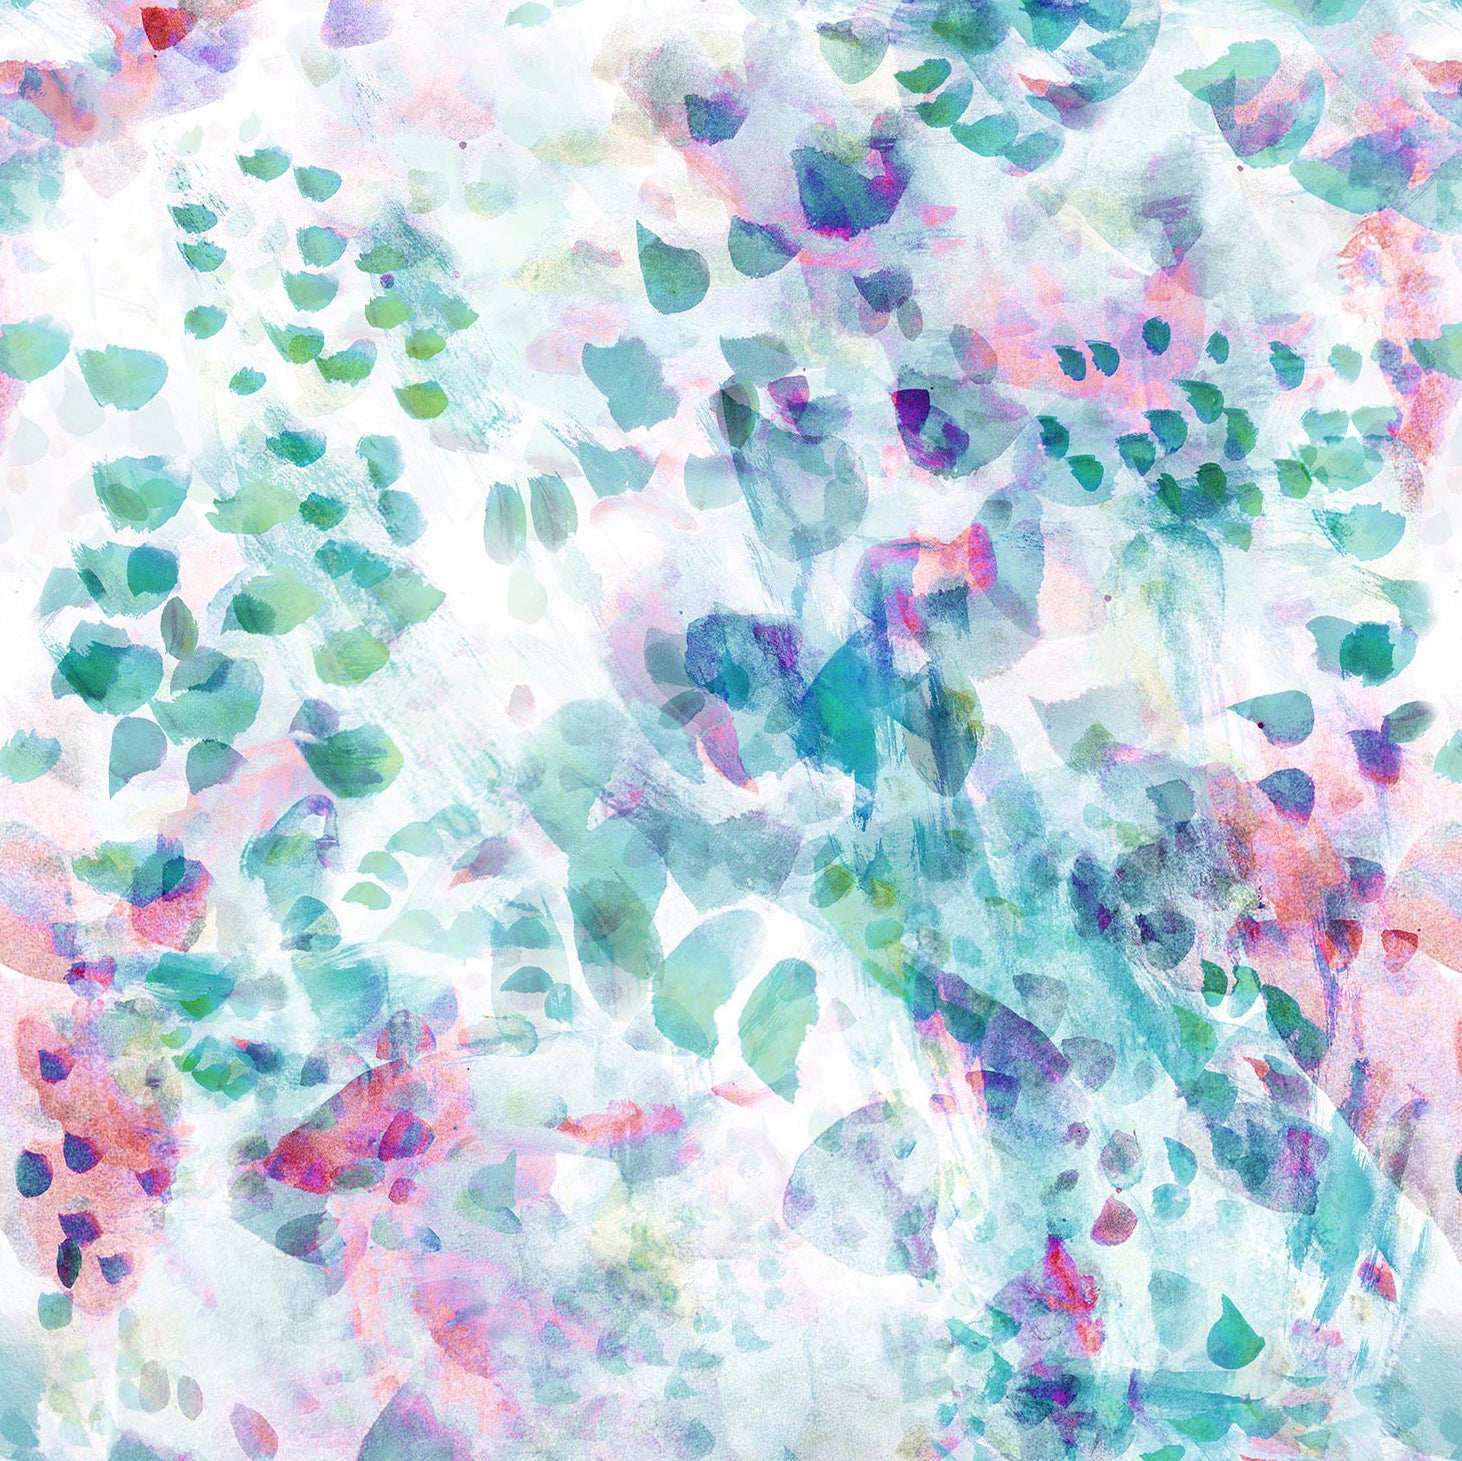 Detail of wallpaper in an abstract paint blotch print in pink, green and turquoise on a white field.